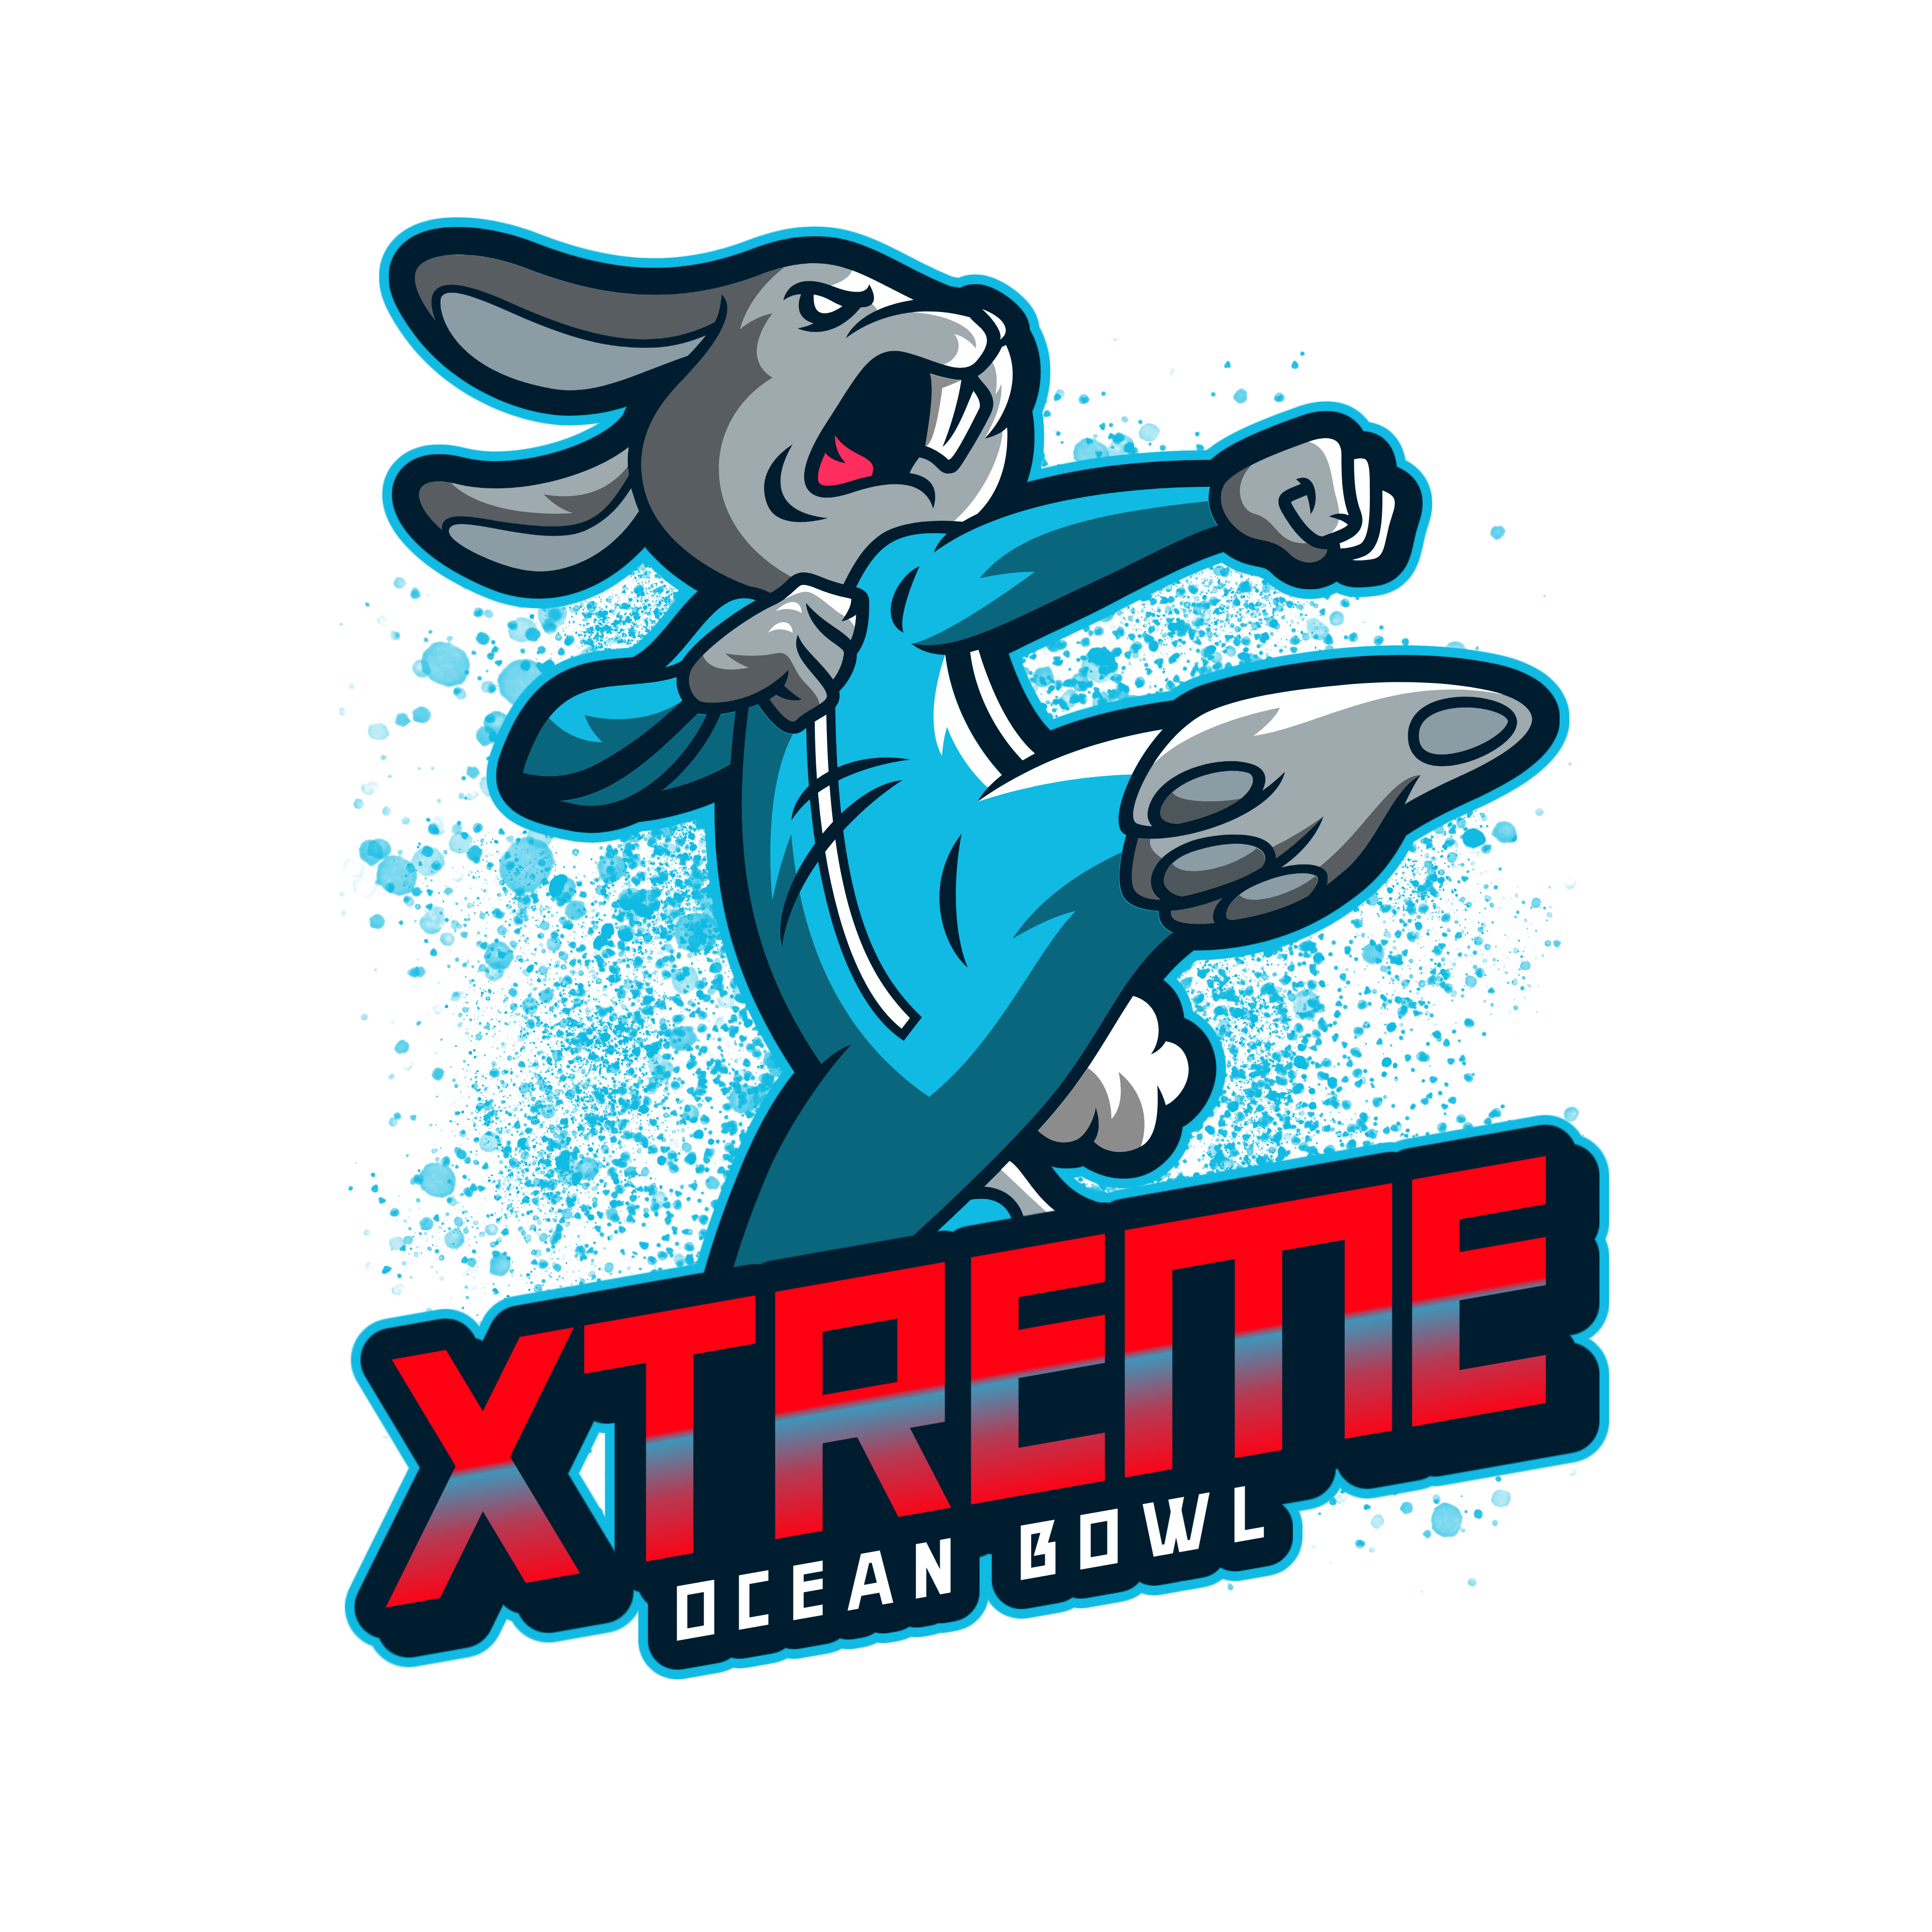 Team Day of Giving Xtremes's logo